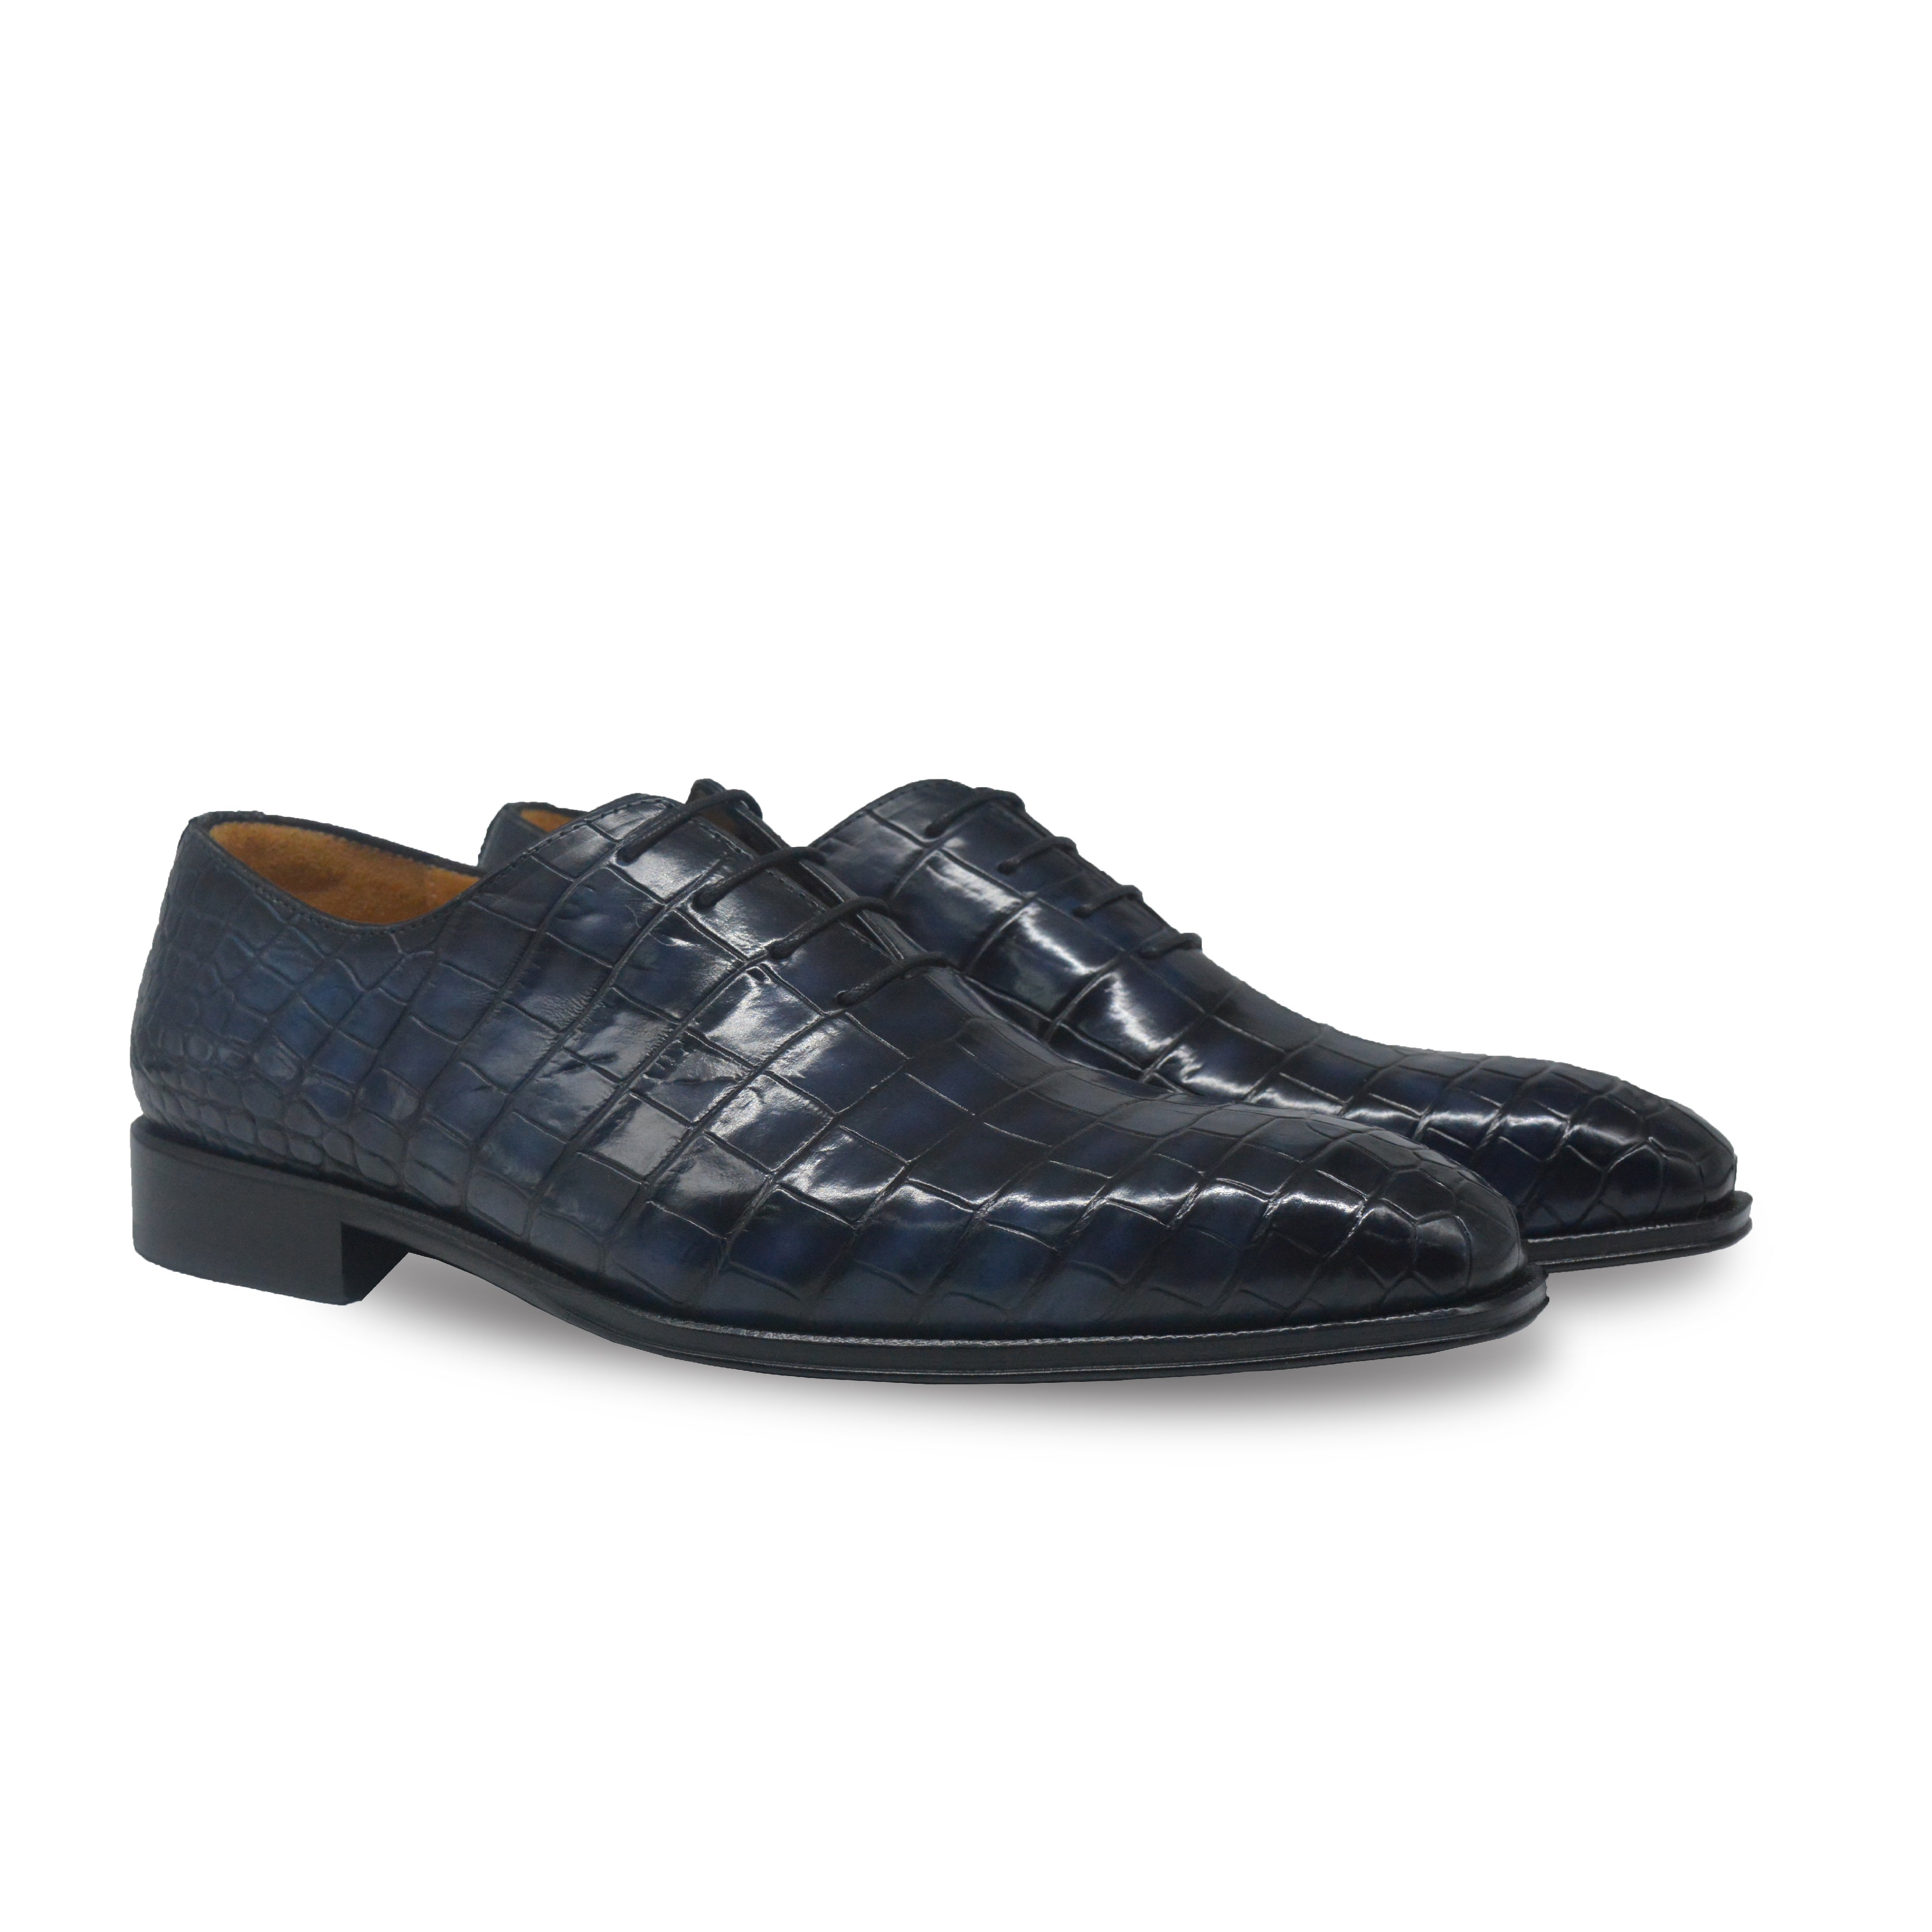 Navy Alligator Whole Cut Lace Up Oxfords